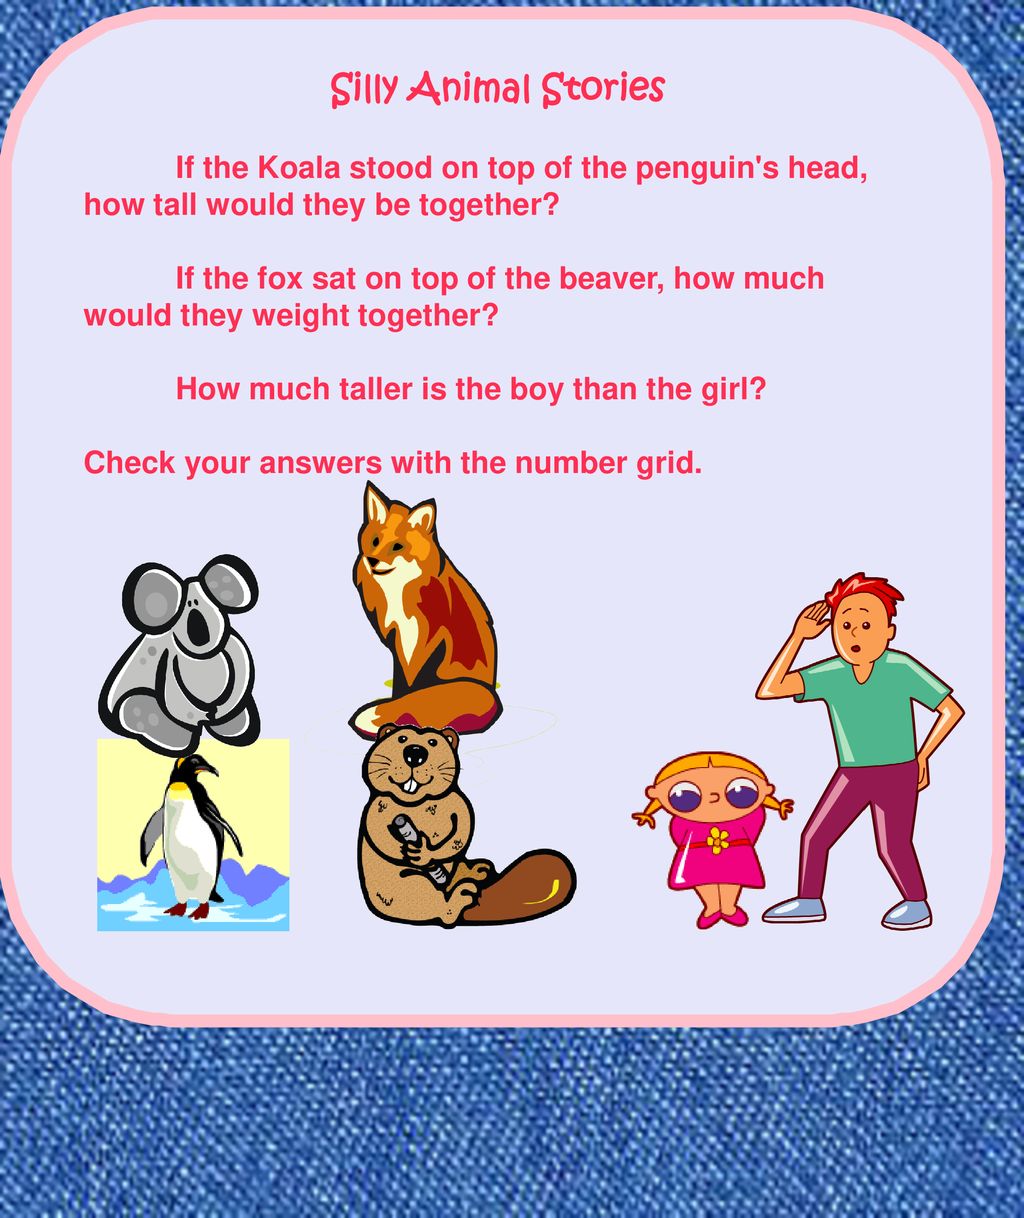 Silly Animal Stories If the Koala stood on top of the penguin s head, how tall would they be together